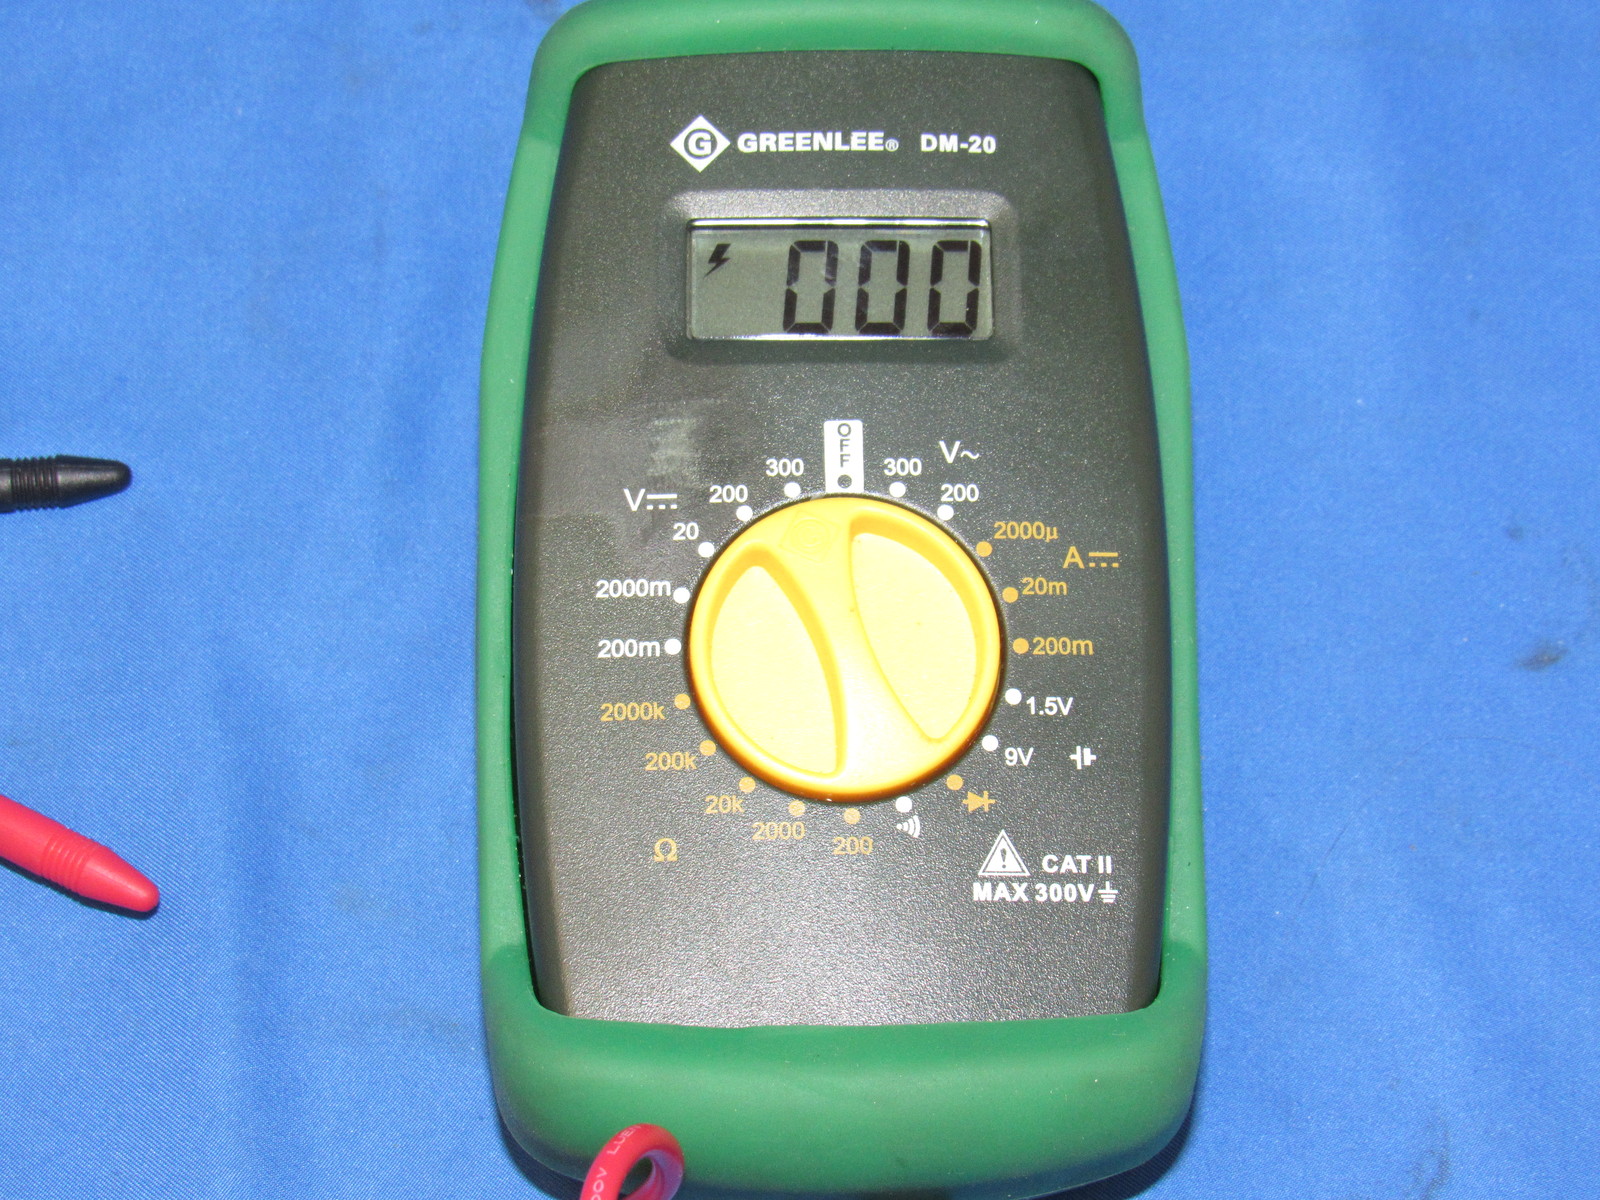 Greenlee DM-20 Multimeter with GT-10 Circuit Tester and GT-11 Voltage